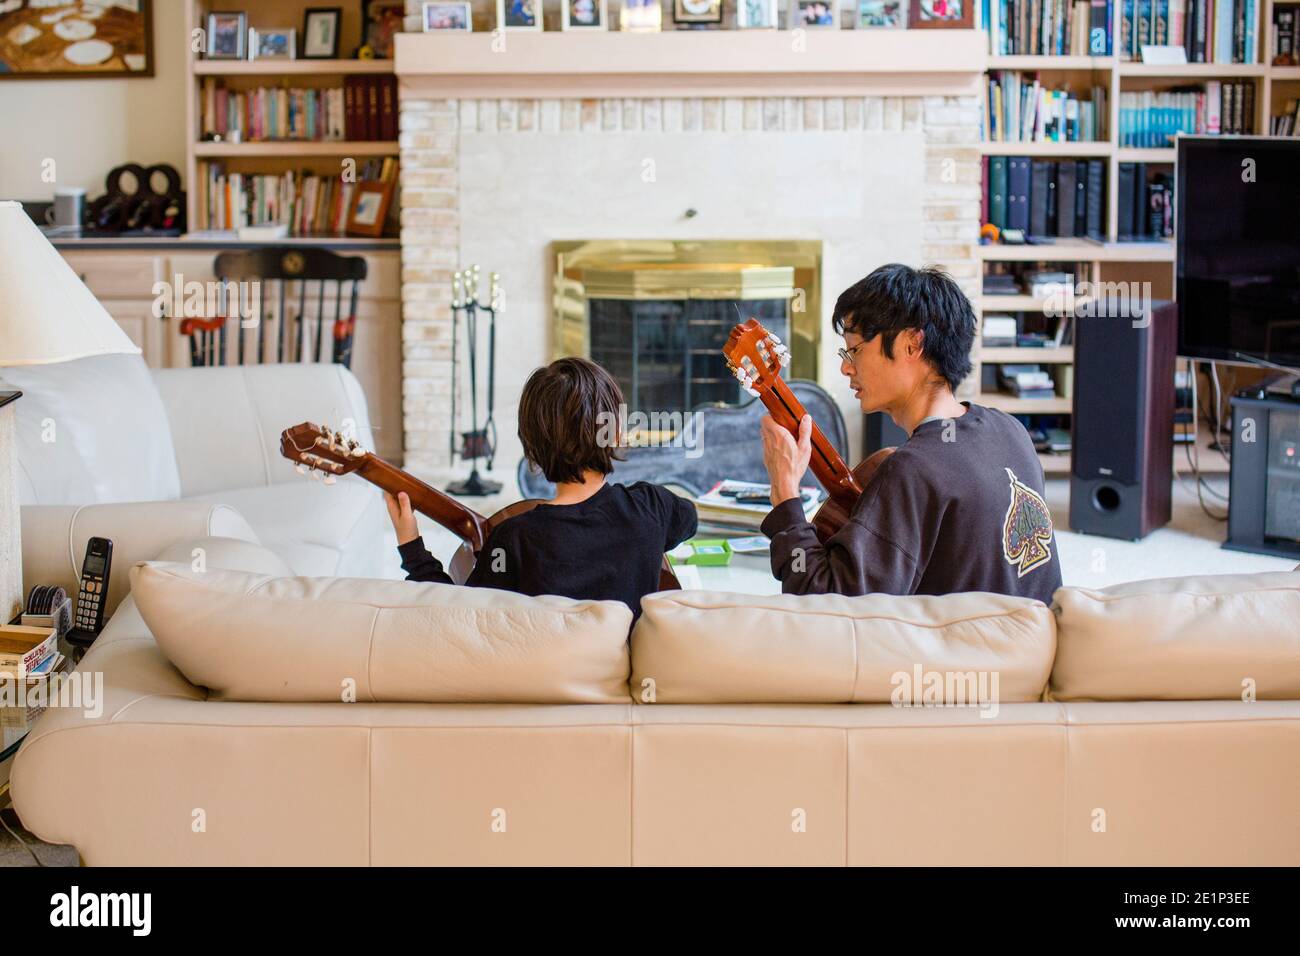 A father and son sit together on couch playing classical guitar music Stock Photo